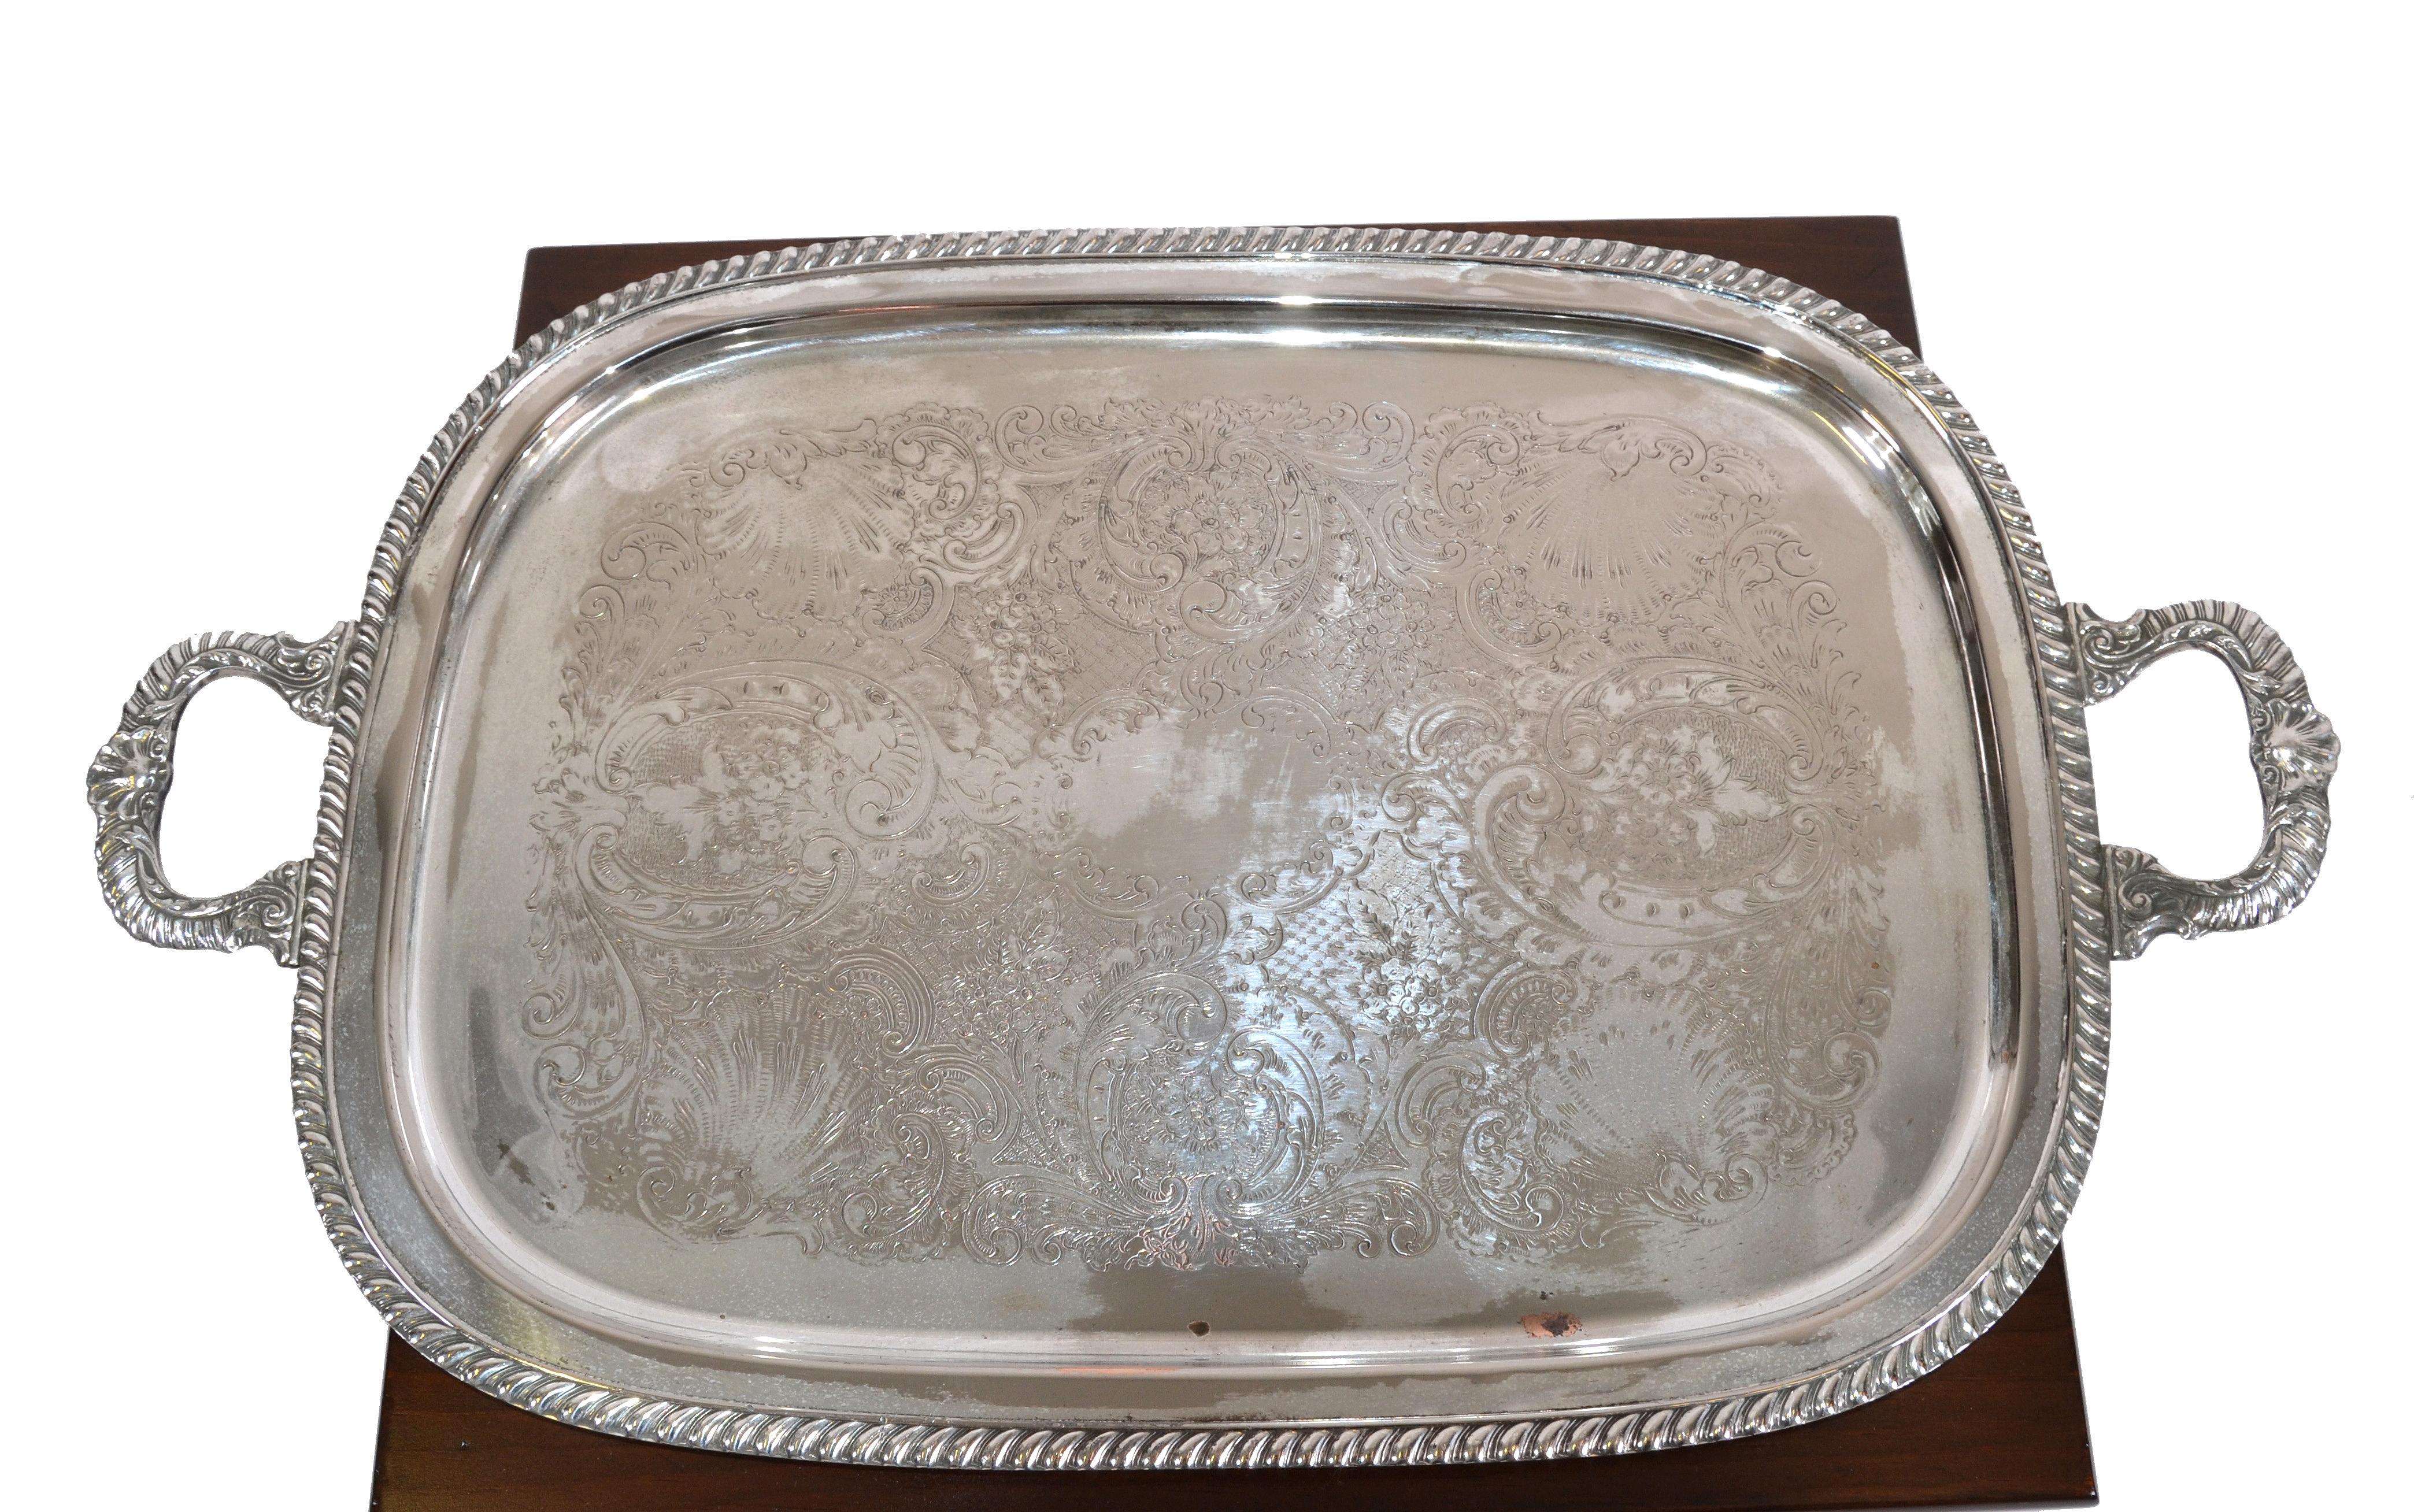 Old English Silver Plate Ornate Rectangular Footed Serving Tray with Handles.  (Britisch Kolonial) im Angebot